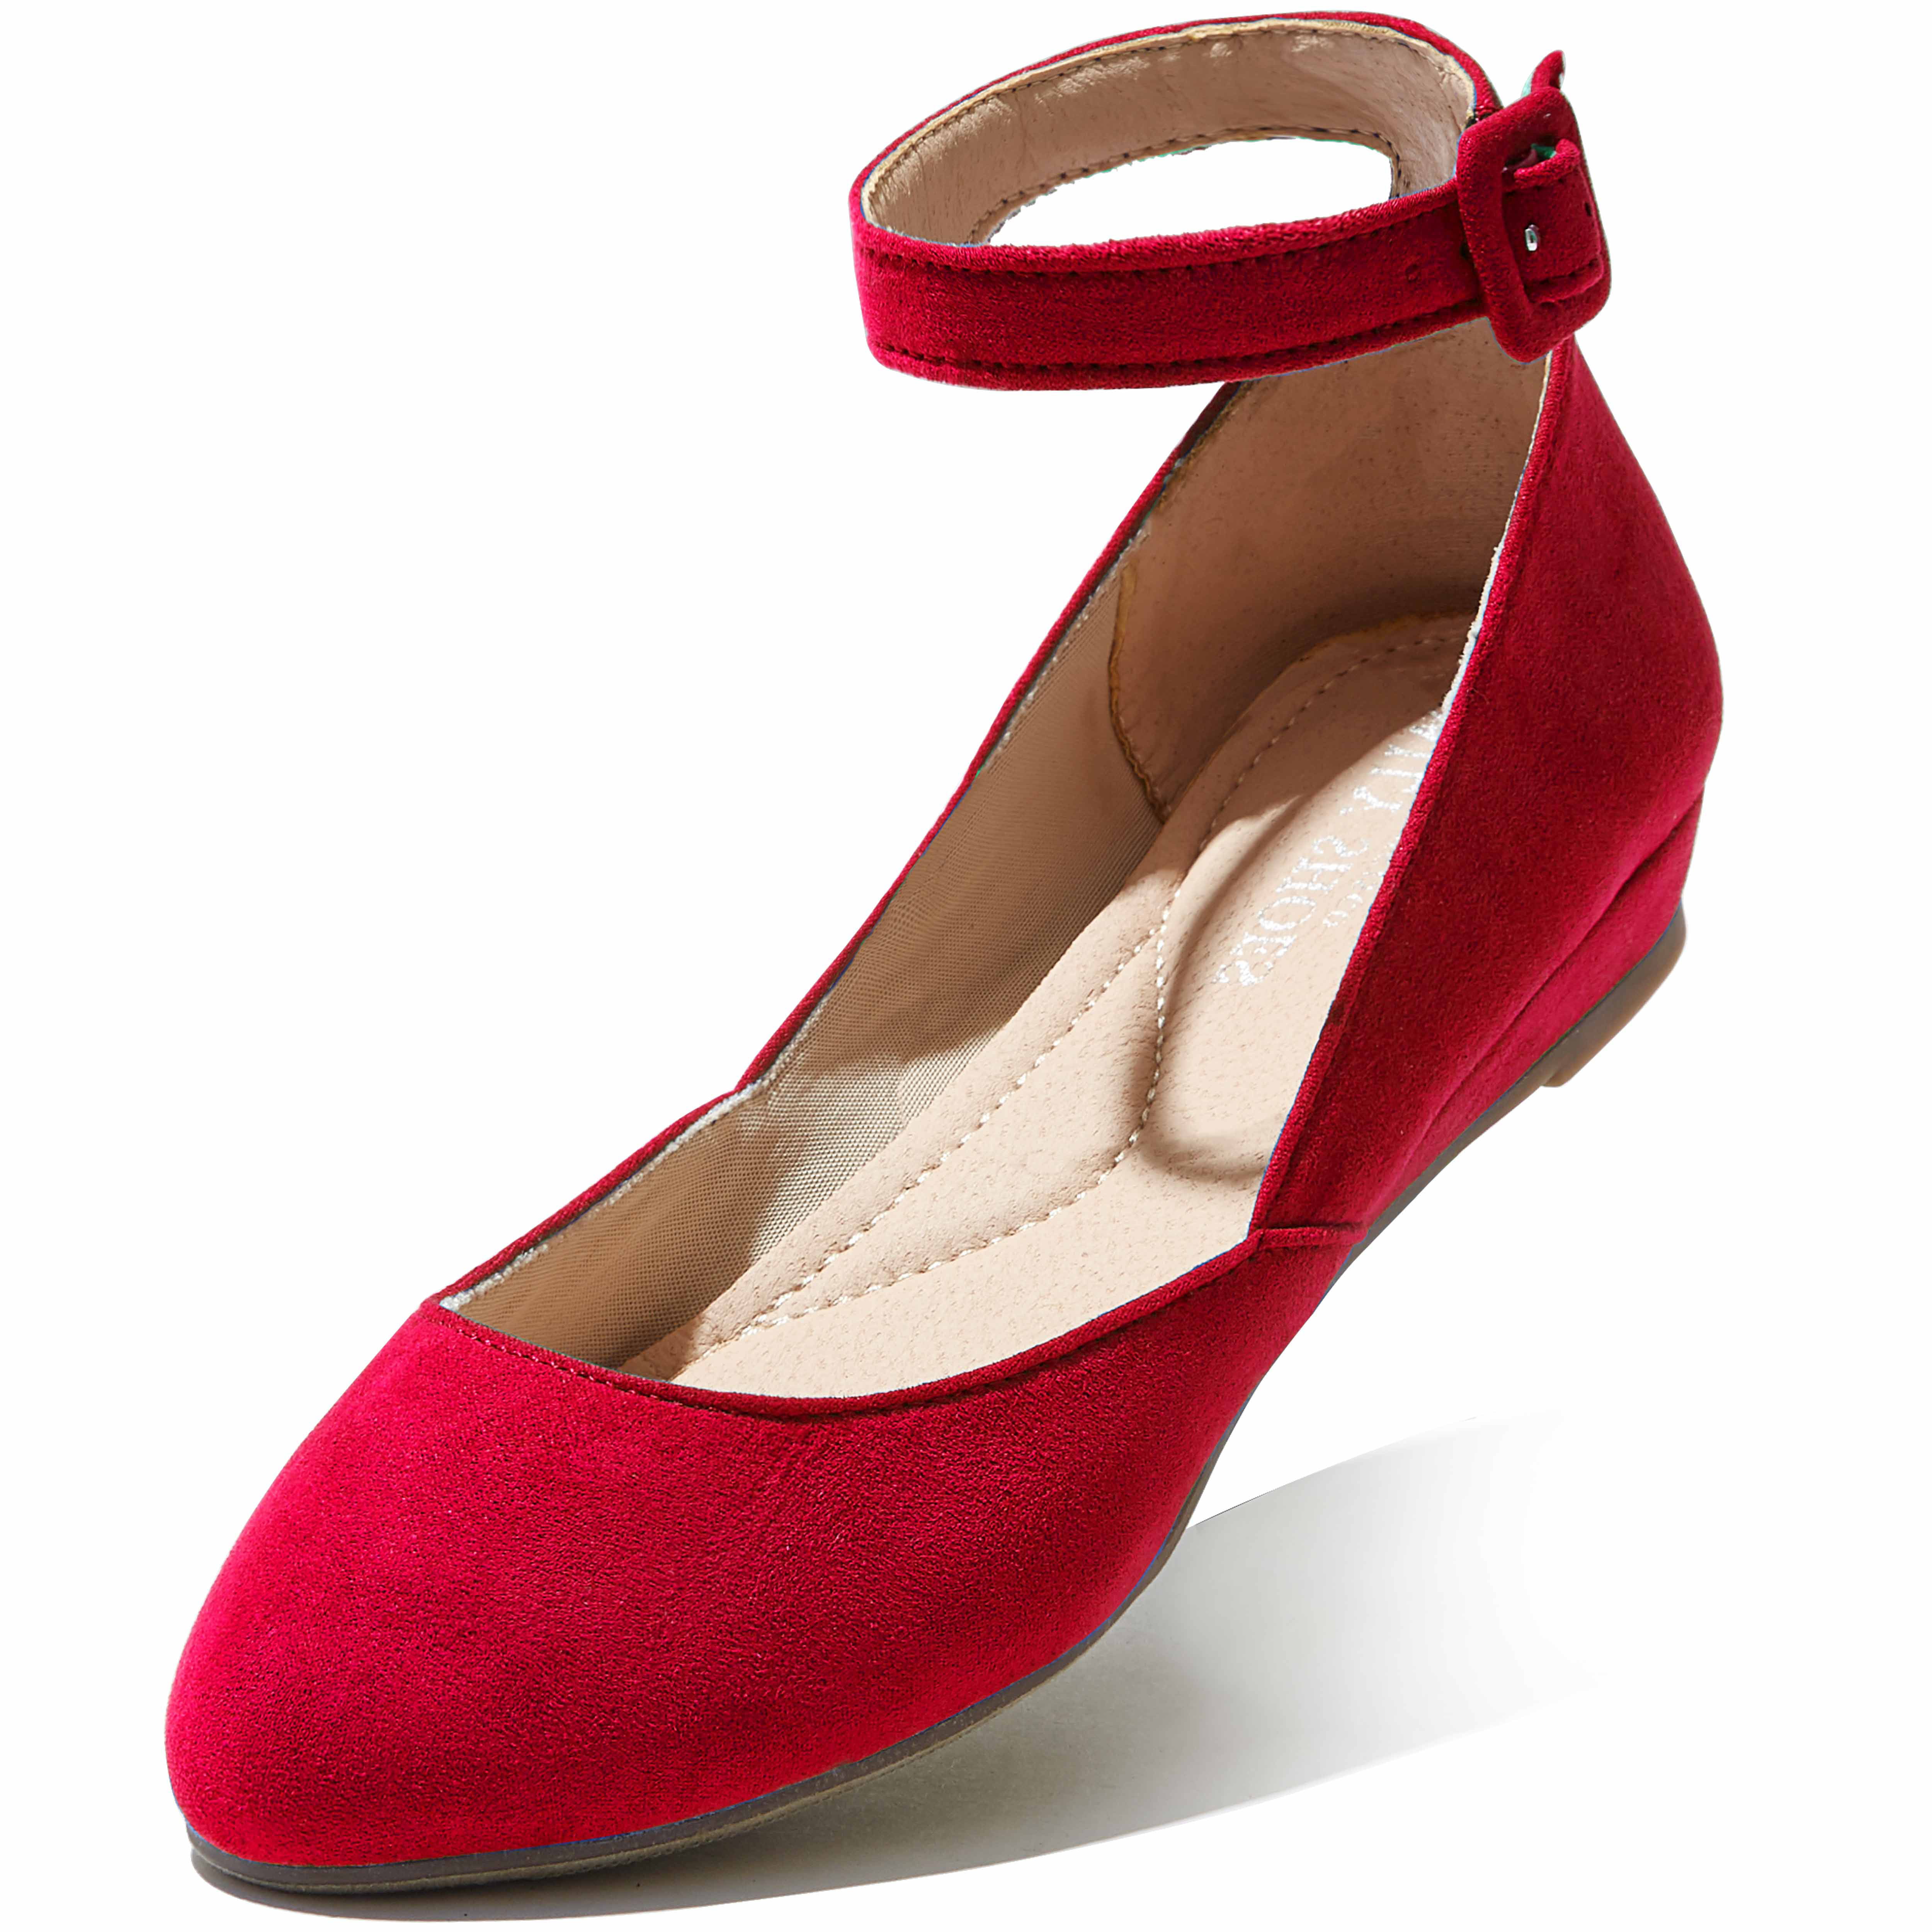 DailyShoes Ankle Strap Low Wedge Flat Shoe Ballet Buckle Classic Comfortable Ballerina Rounded Toe Slip On Round Hillsdale-01 Red Sv 8 - Walmart.com